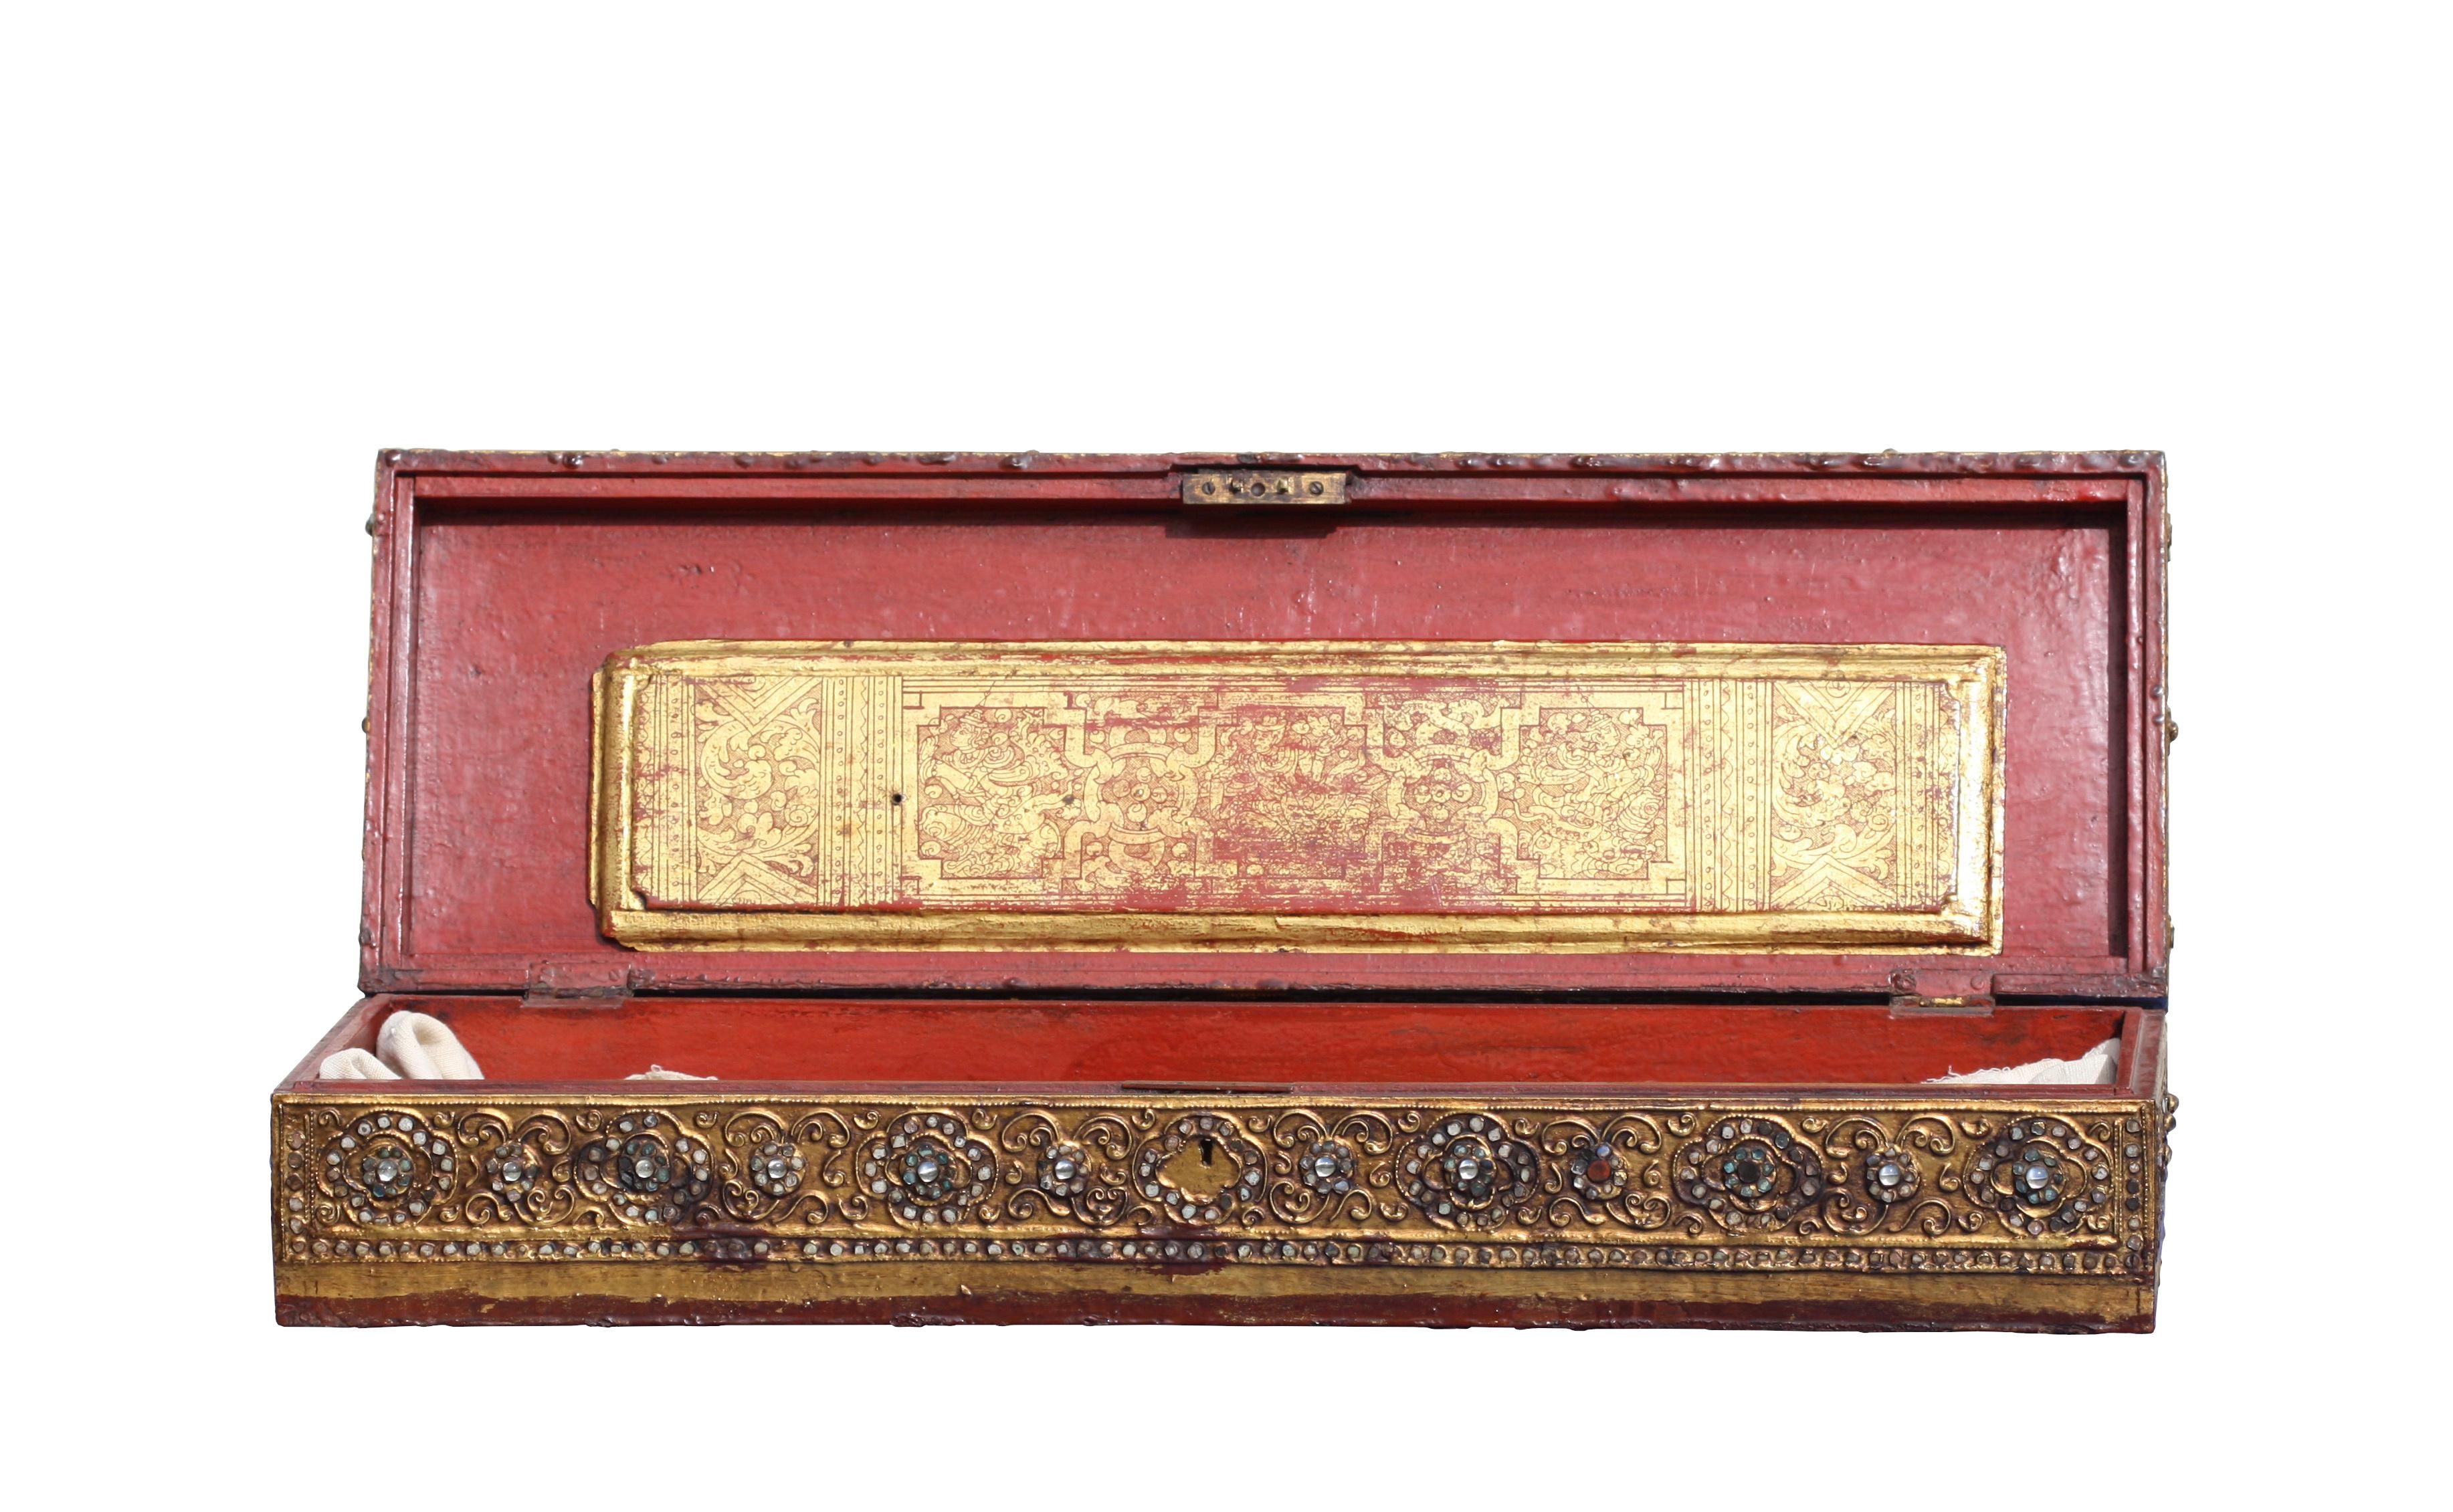 An antique Burmese set of sixteen double-sided Kammavaca or Buddhist manuscripts,
written in Bali in red and black lacquer on a gold leaf ground.
This set is accompanied by the original pair of gold leaf and red lacquer pictorial cover